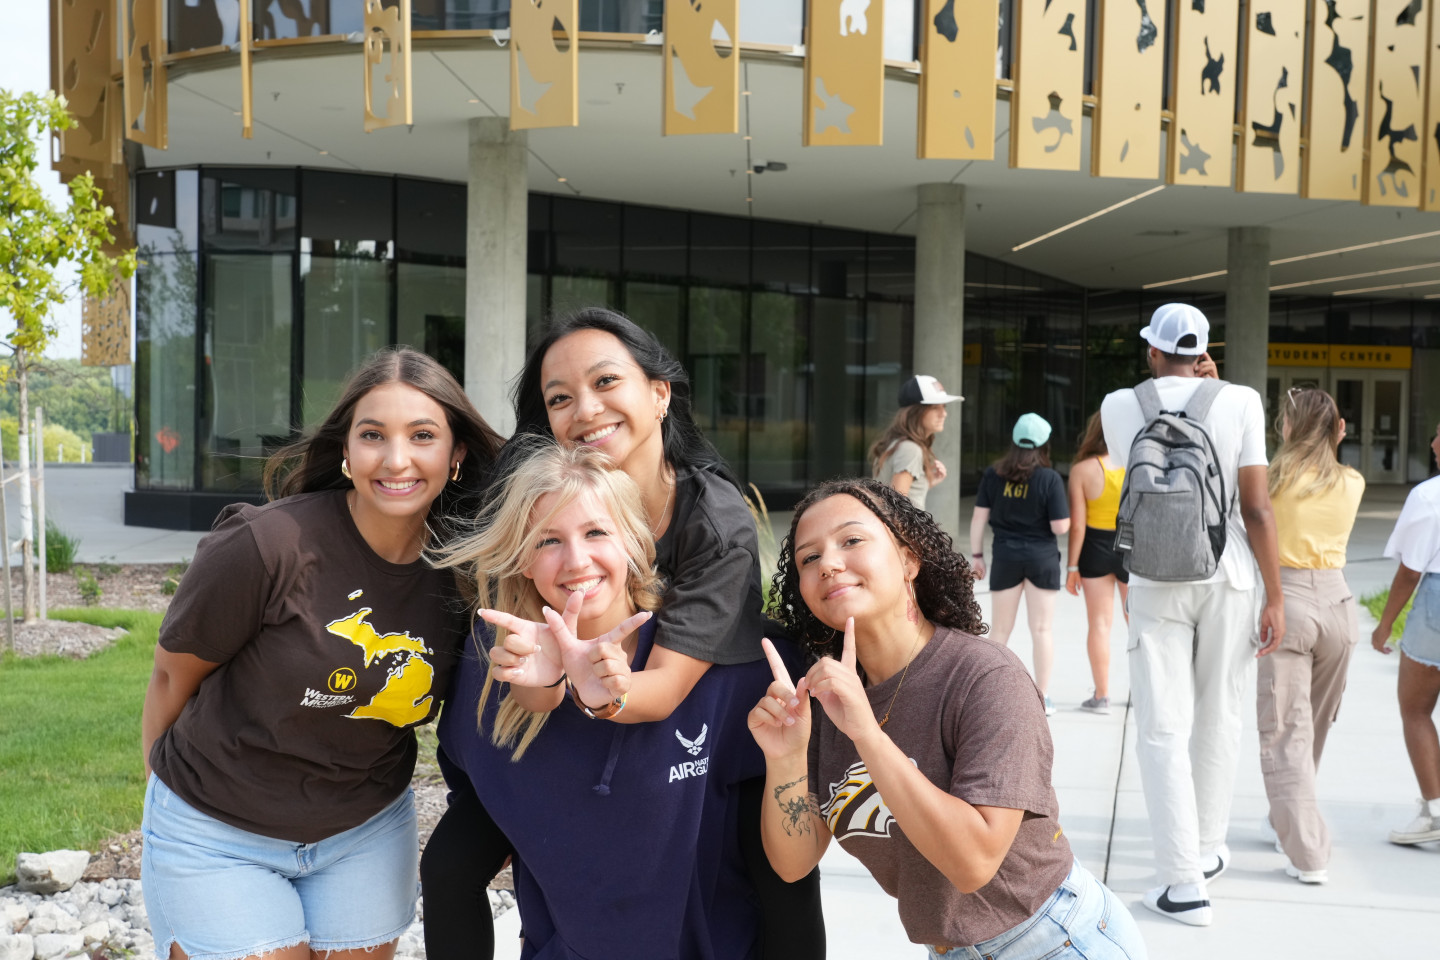 Students stand together in front of the ܽƵ Student Center.